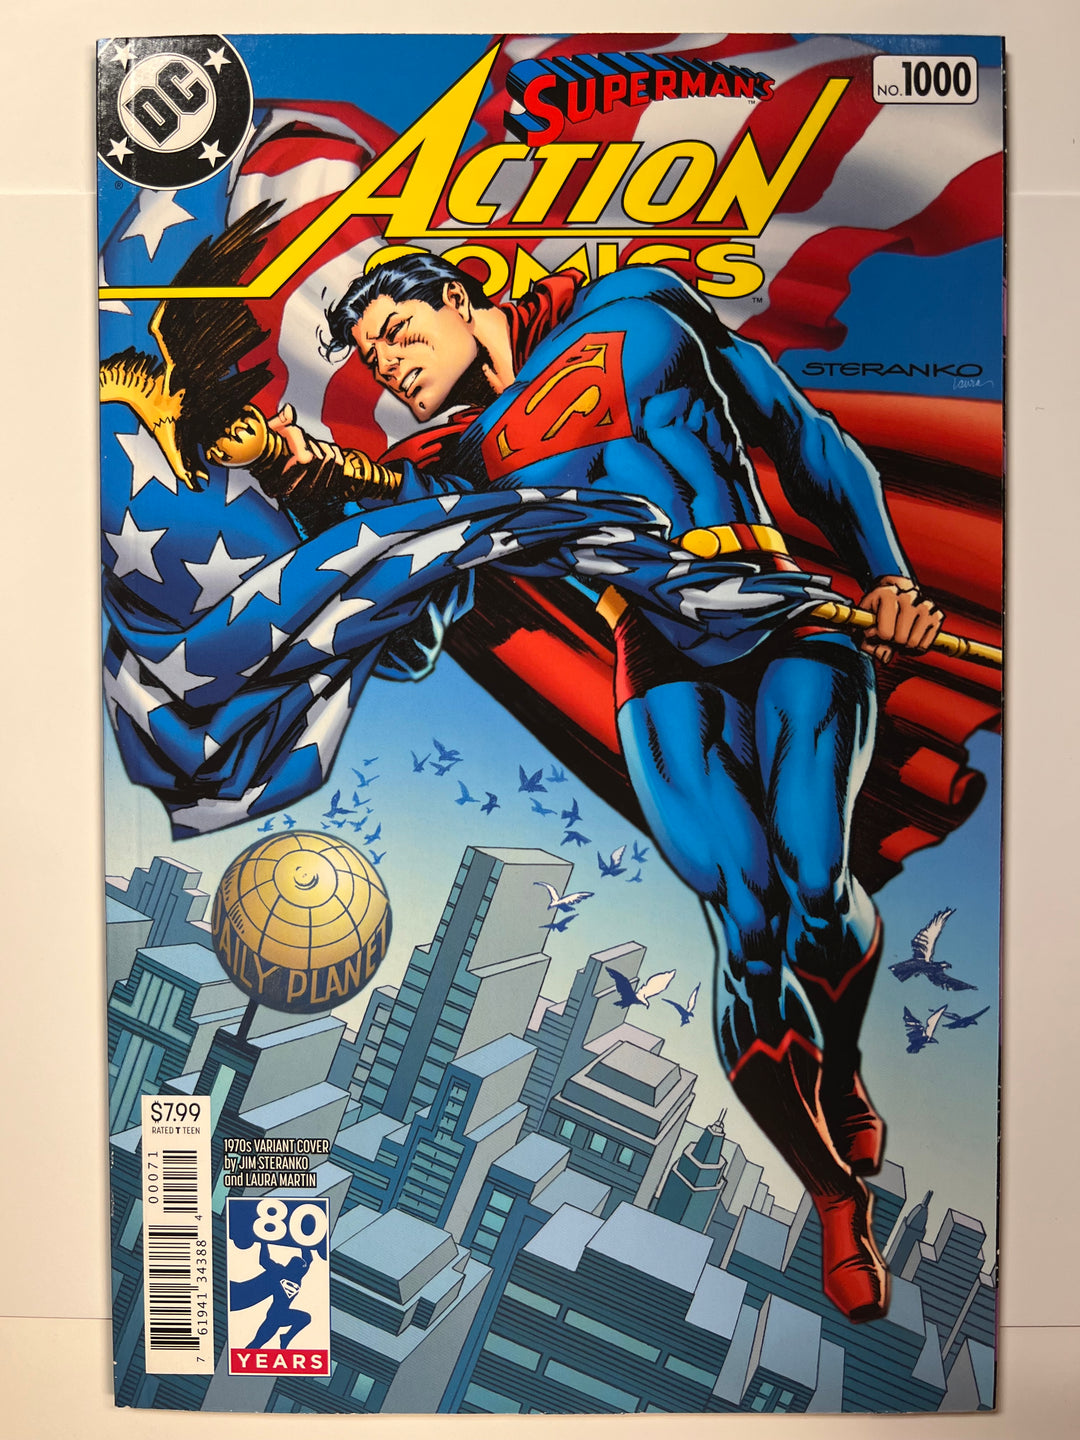 Action Comics #1000 '1970s' Variant Cover DC 2018 NM